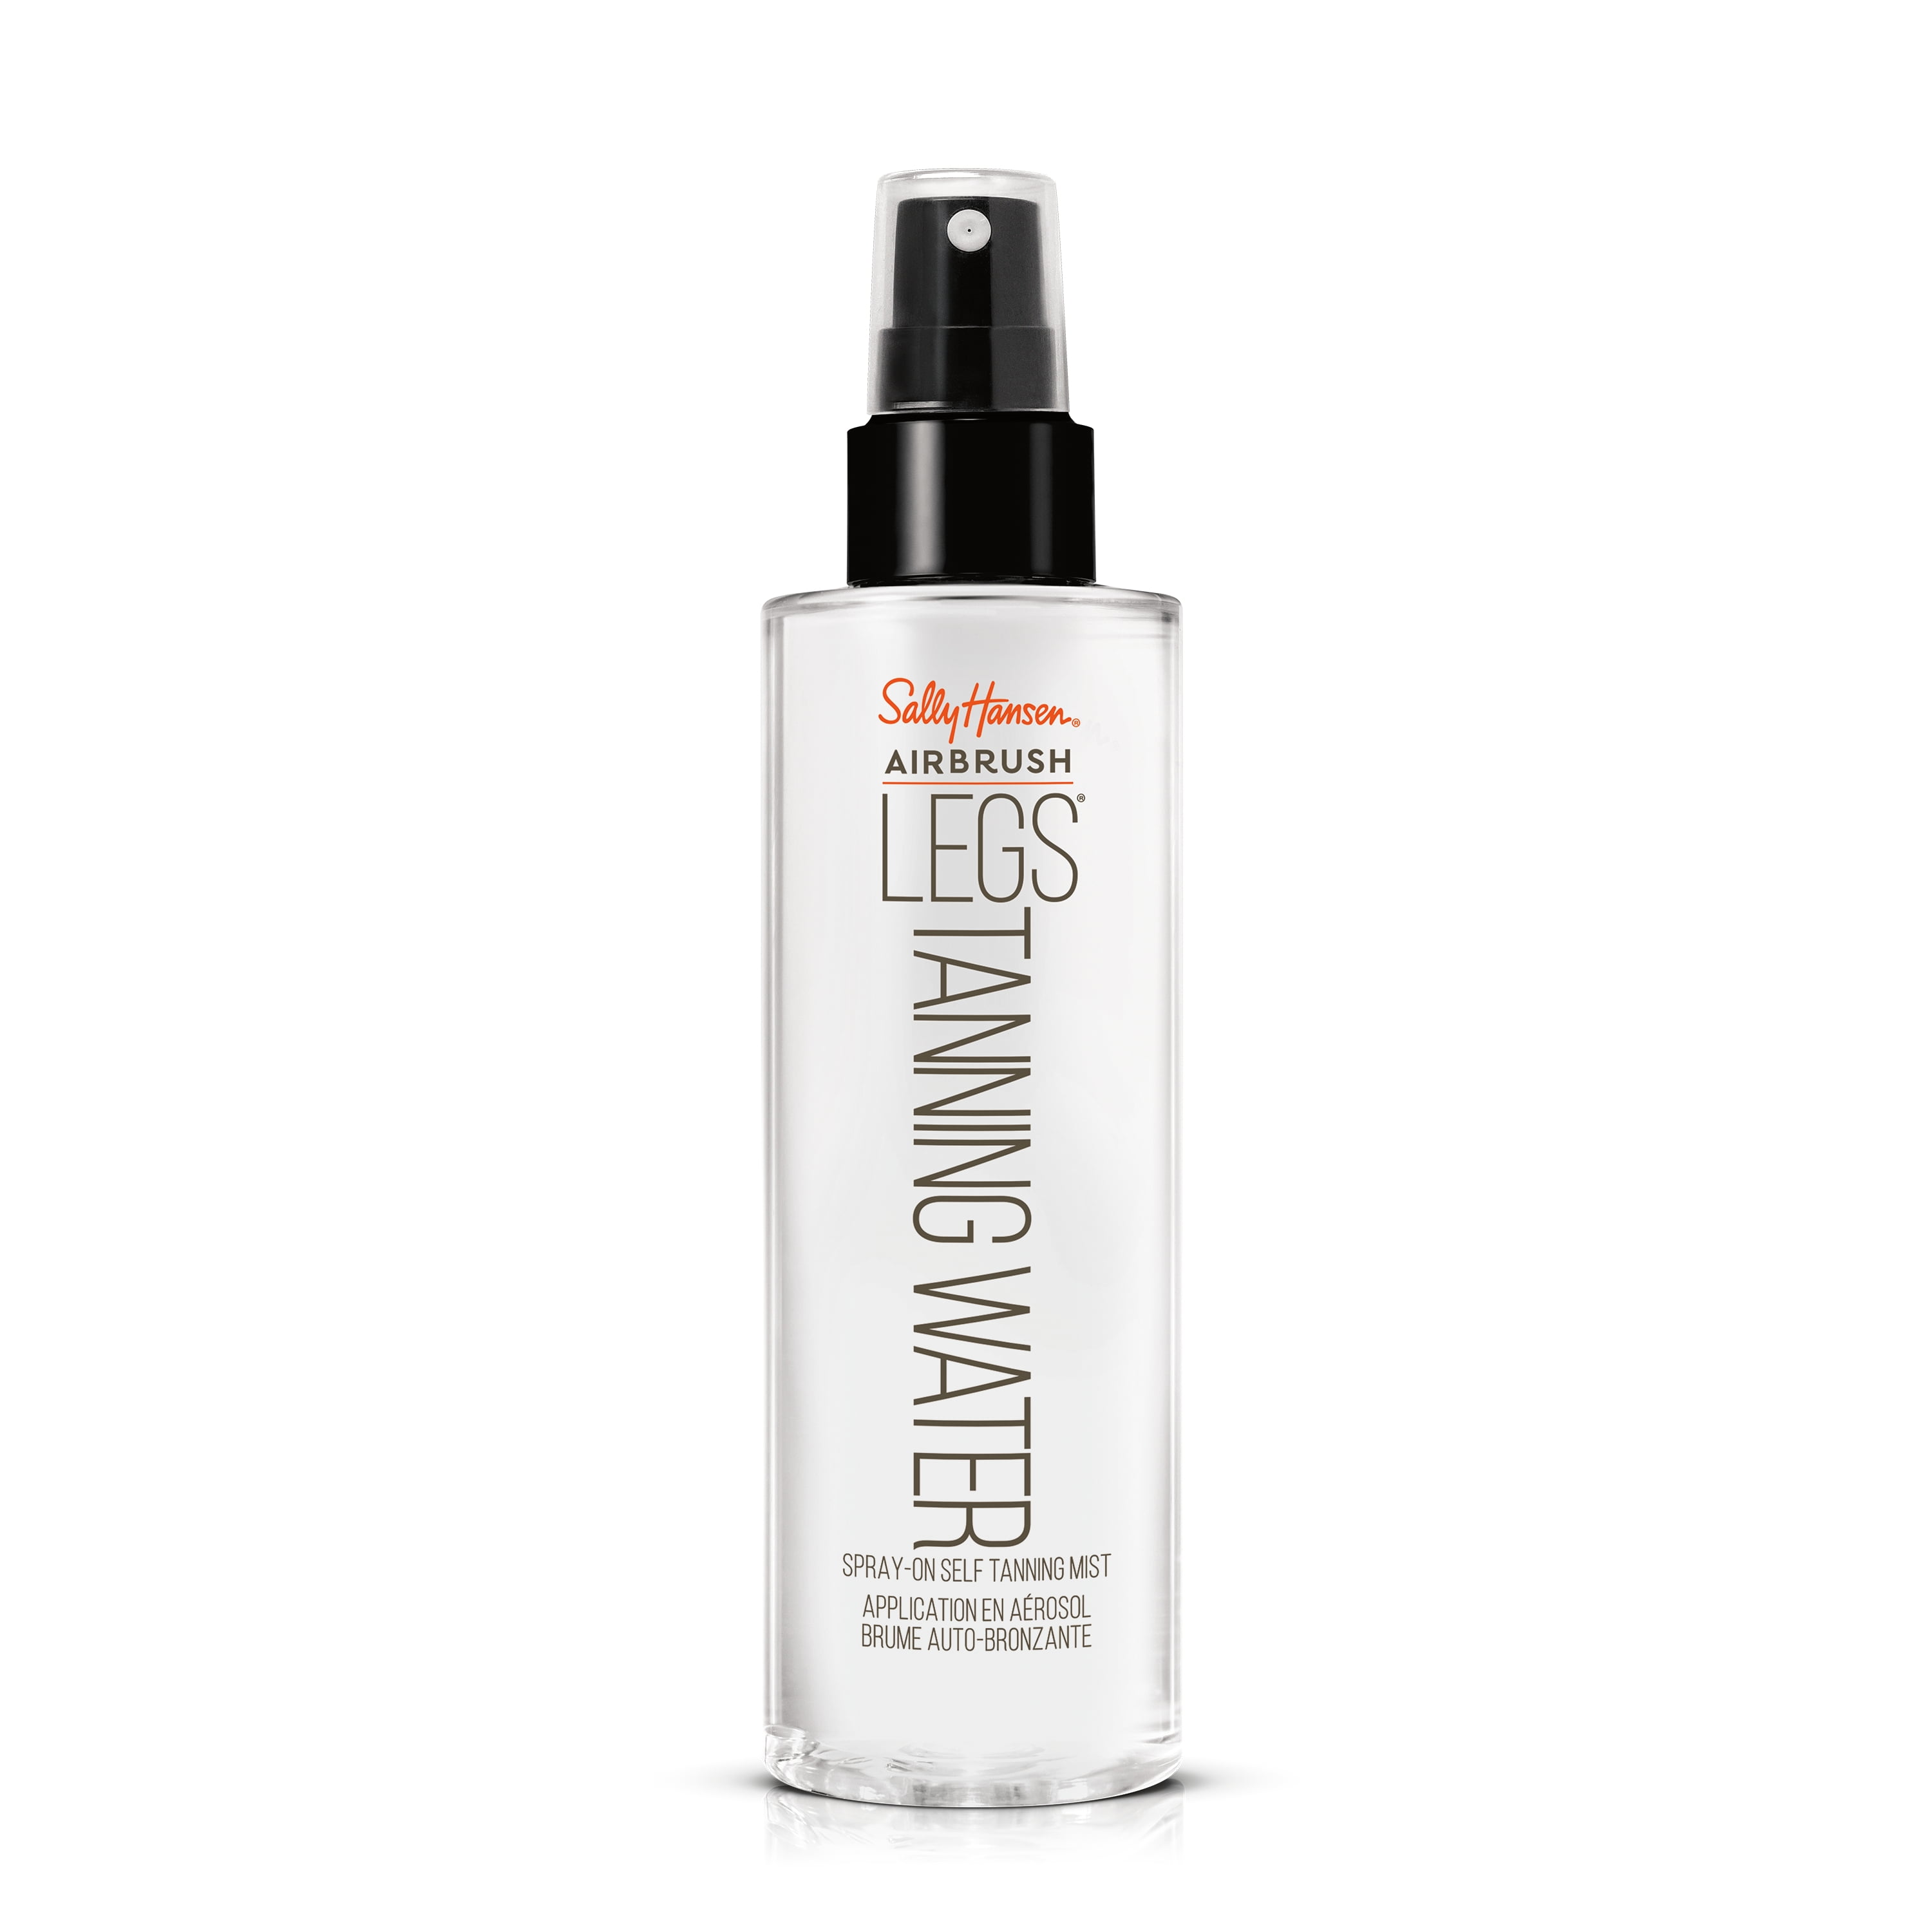 Drugstore Discoveries: Carmindy Natural Beauty Airbrush Spray